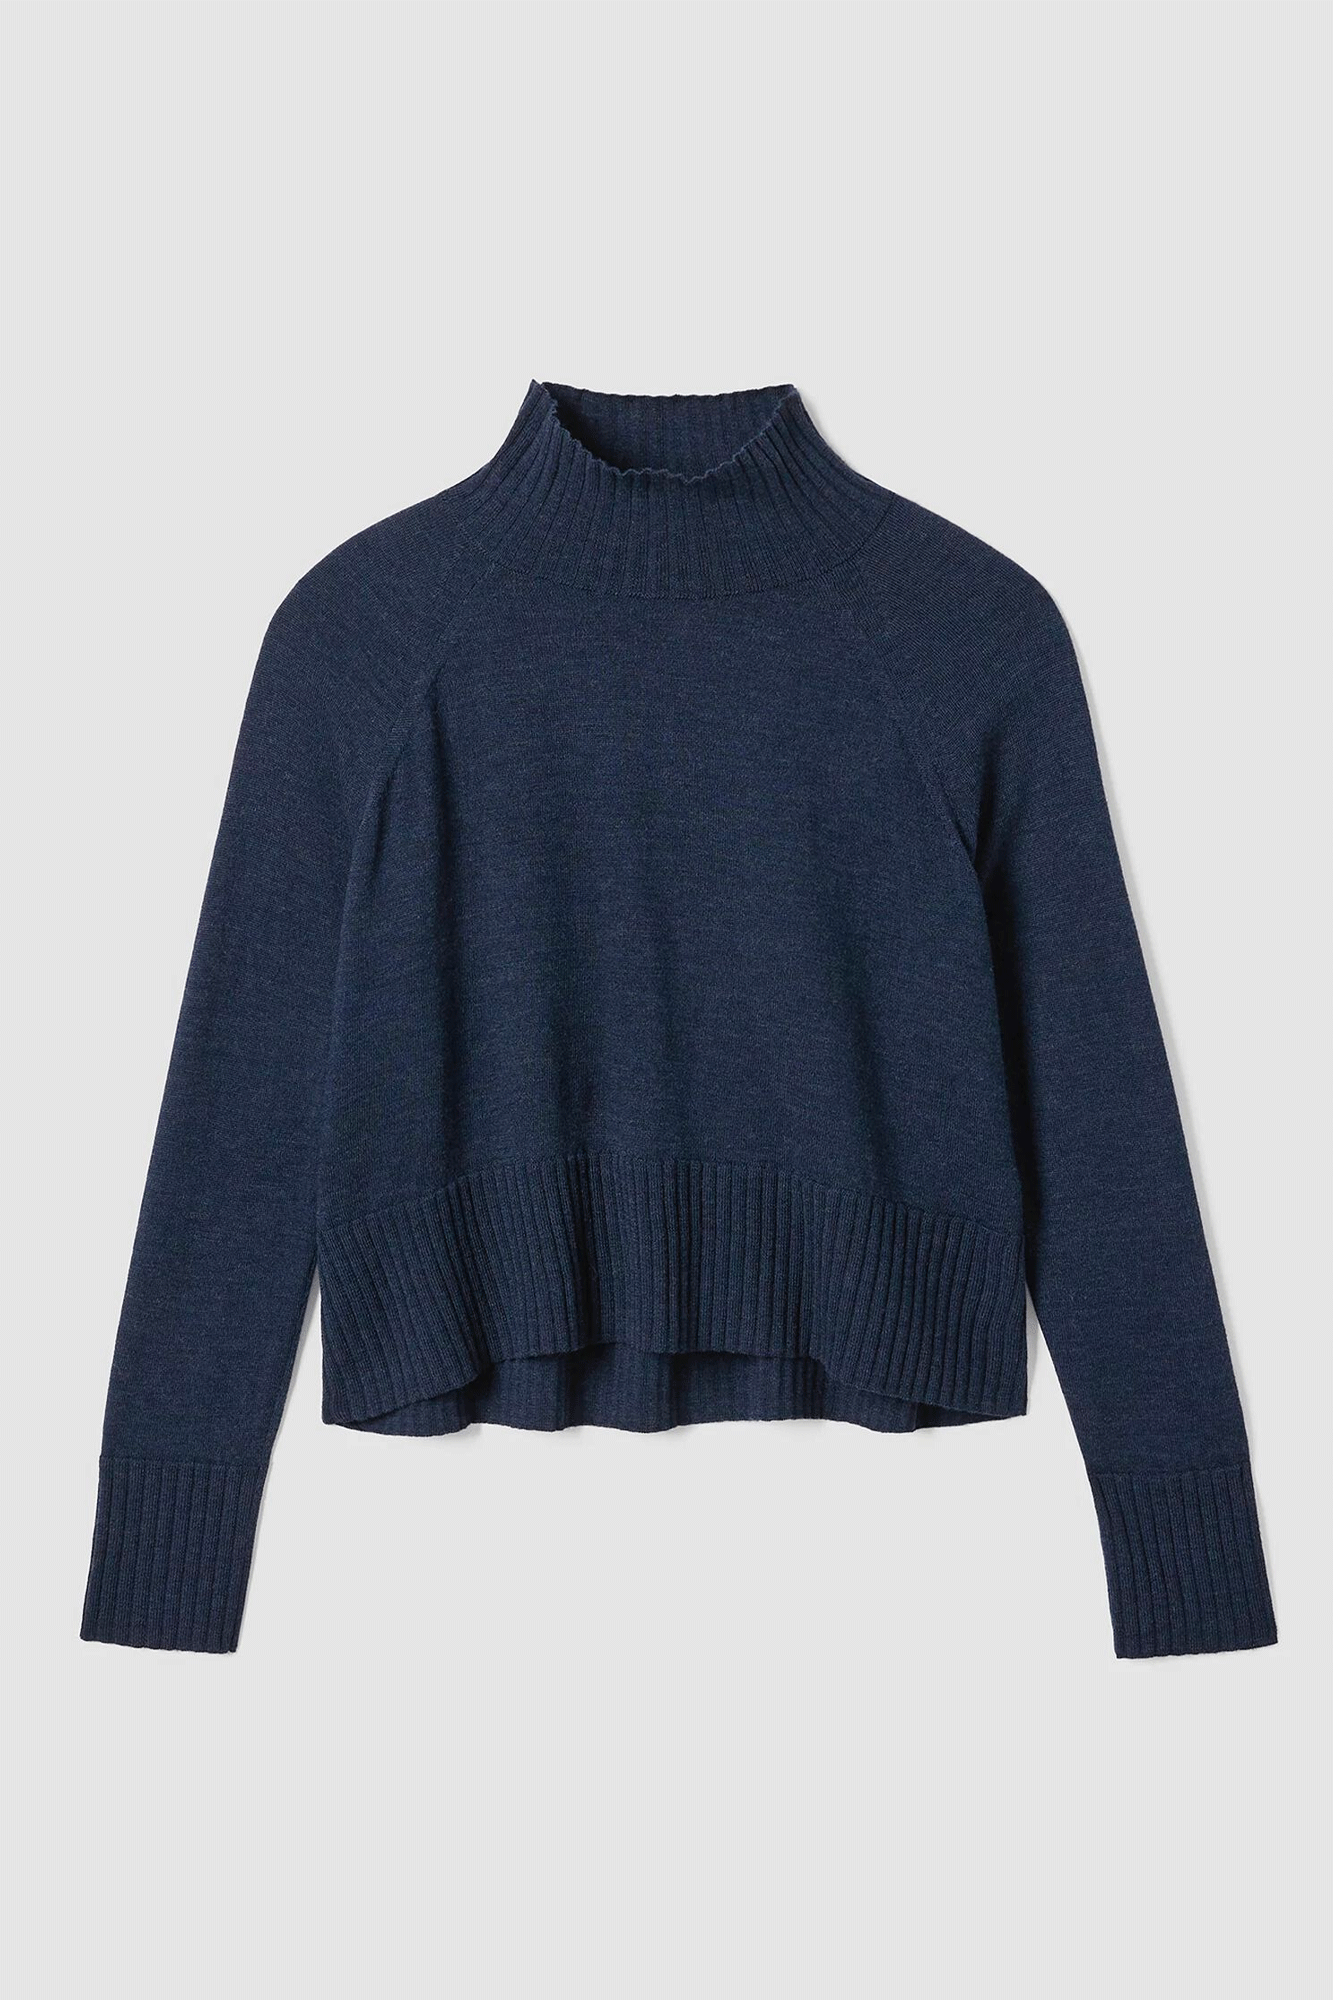 Experience comfort and style with this timeless Turtleneck Sweater from Eileen Fisher. Crafted with breathable merino wool, it features ribbed details and a stylish cropped length. Enjoy the feel of regenerative wool fibers while looking great. Perfect for high waisted pants.